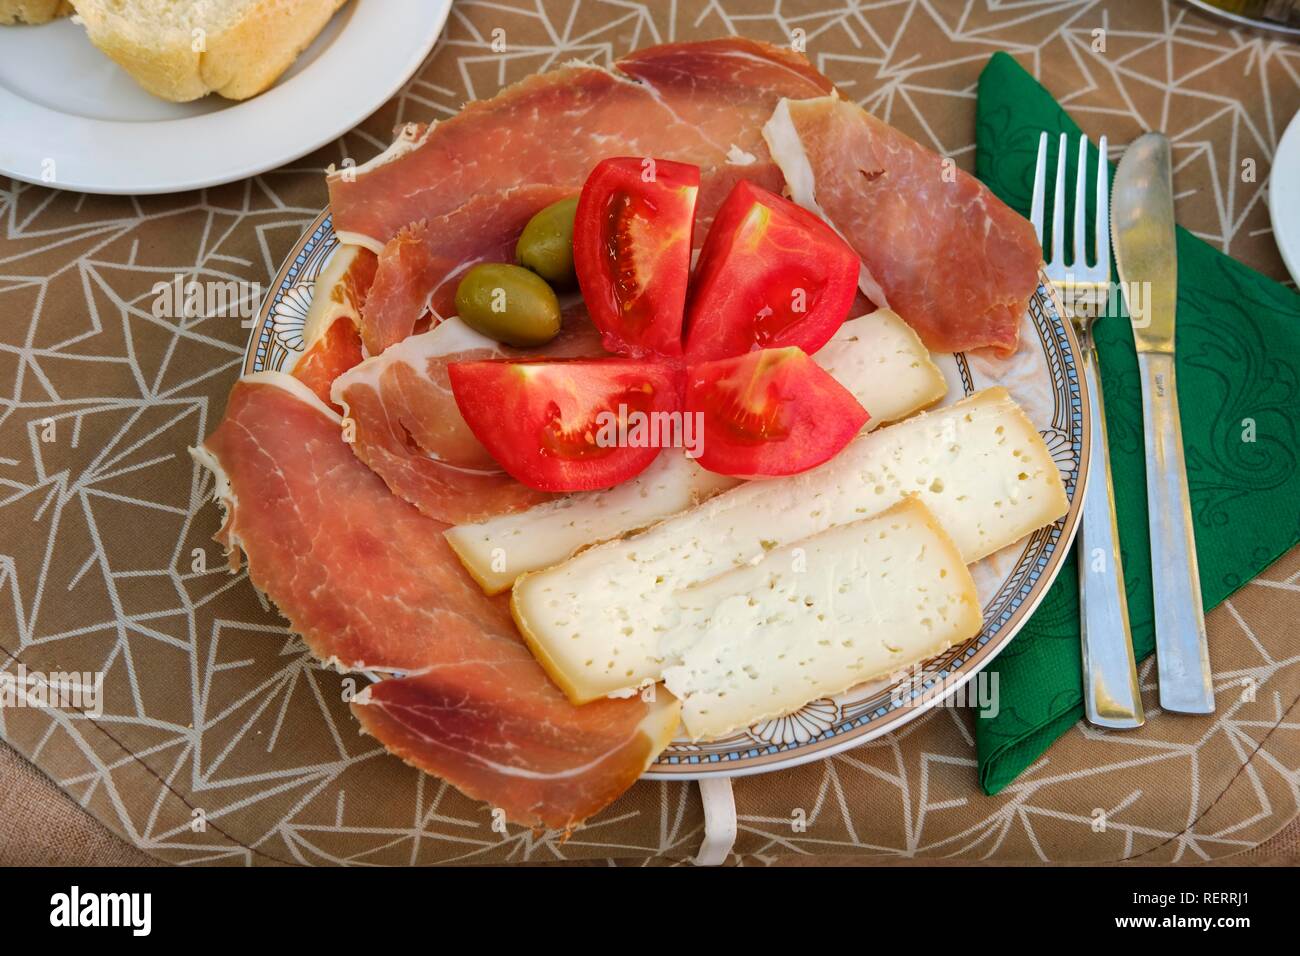 Ham, cheese and tomatoes on plate, breakfast or snack, Province Podgorica, Montenegro Stock Photo